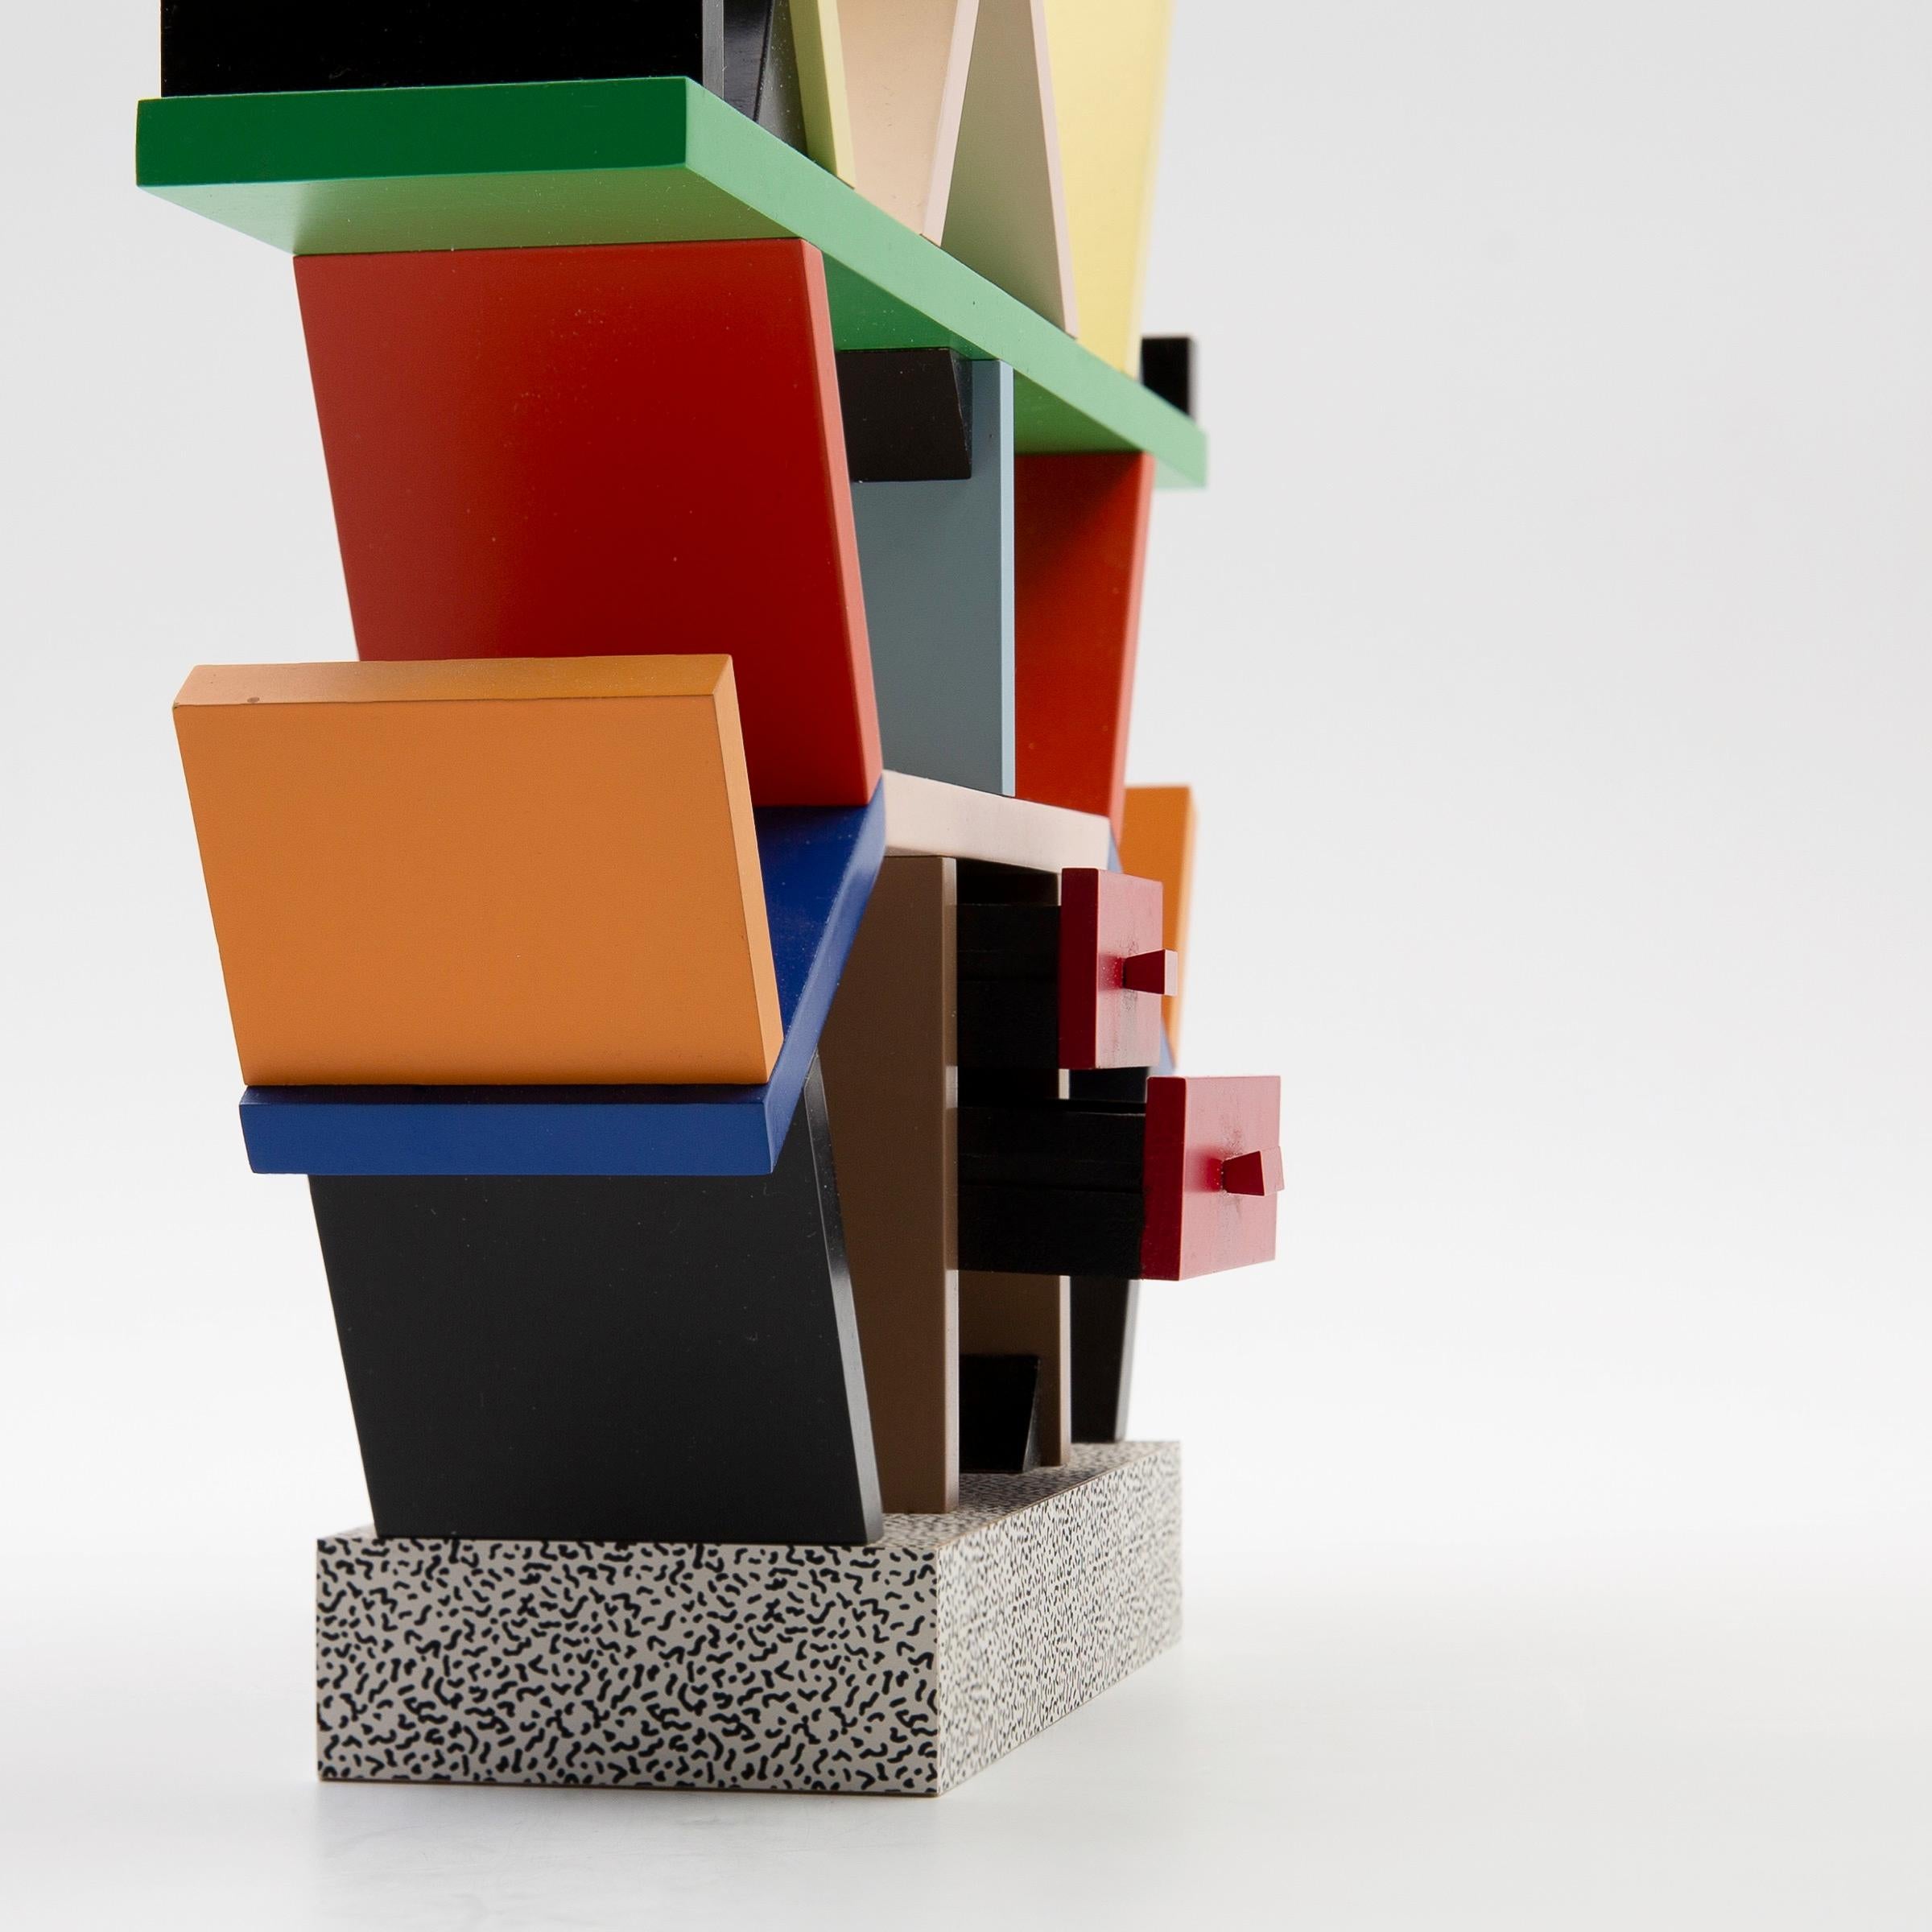 A perfect miniature reproduction of the iconic Carlton bookcase designed by Ettore Sottsass for Memphis Milano in 1981, this edition from 1995, on 500 Exemplars, this example Artist Proof (Scale 1:6)
Signed E Sottsass PA (Prova d'artista, artist